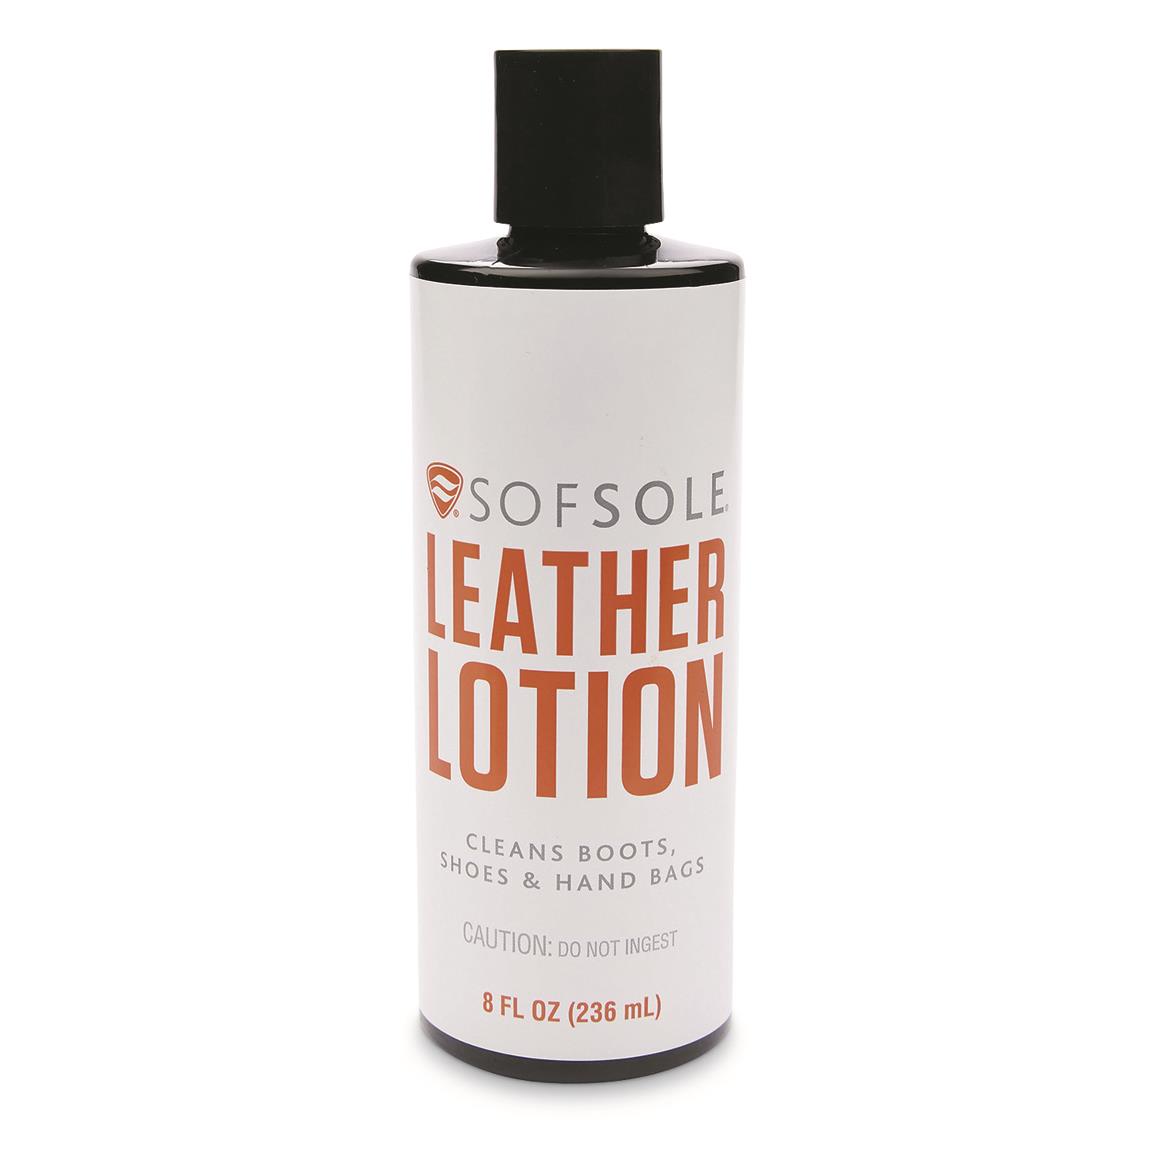 Sof Sole Leather Lotion